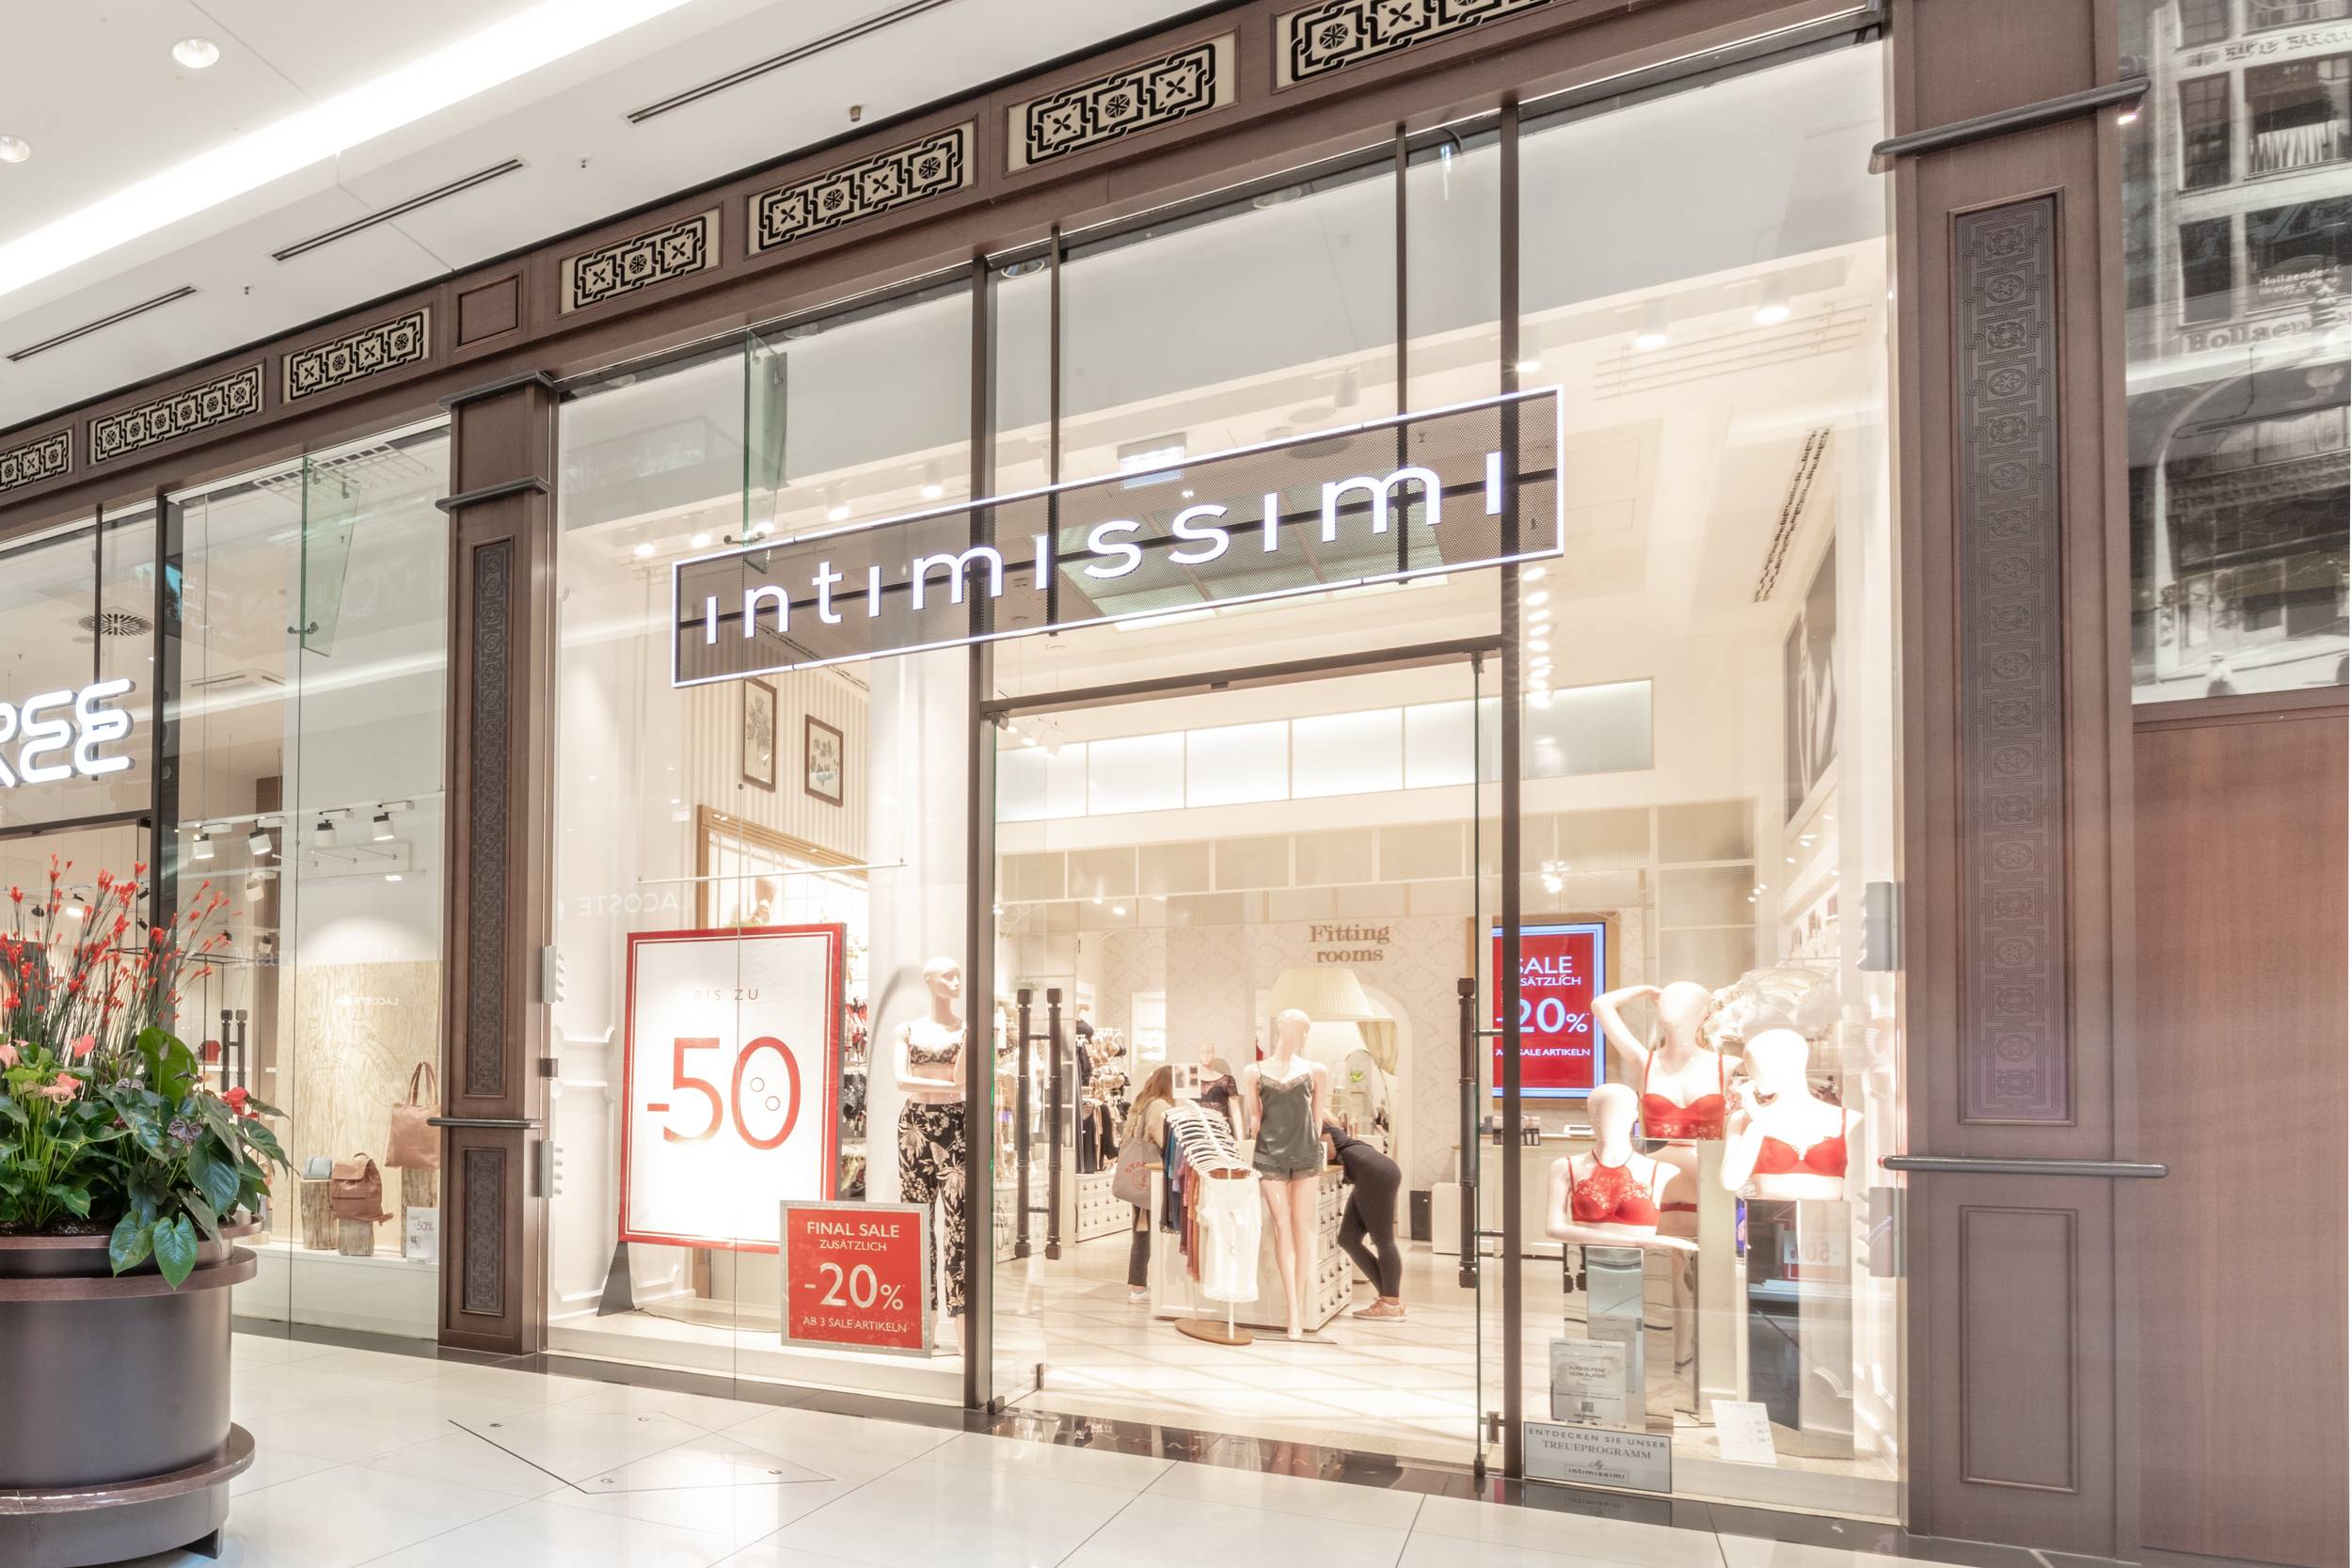 Intimissimi at the Mall of Berlin